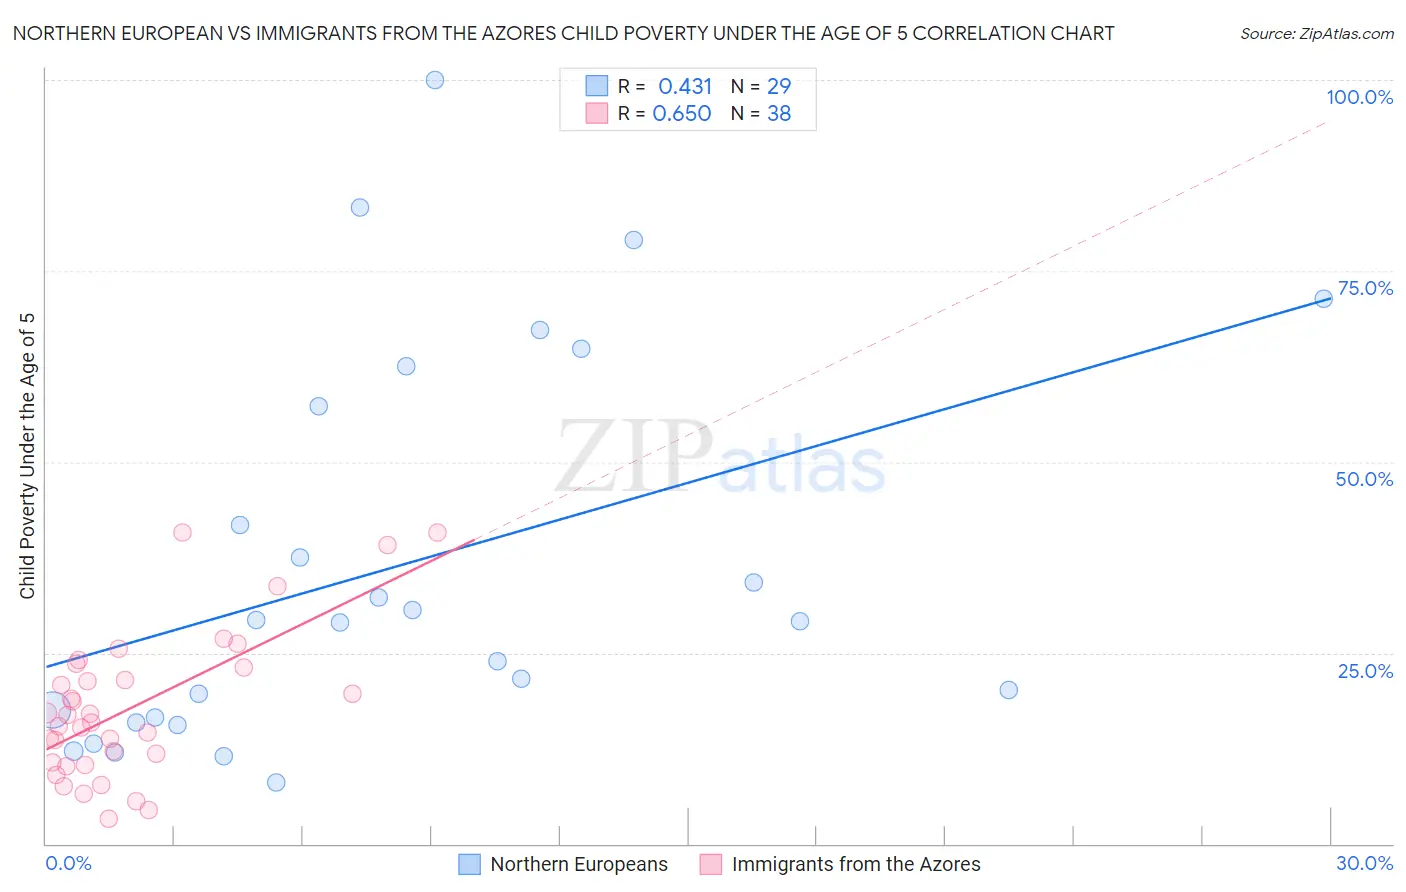 Northern European vs Immigrants from the Azores Child Poverty Under the Age of 5